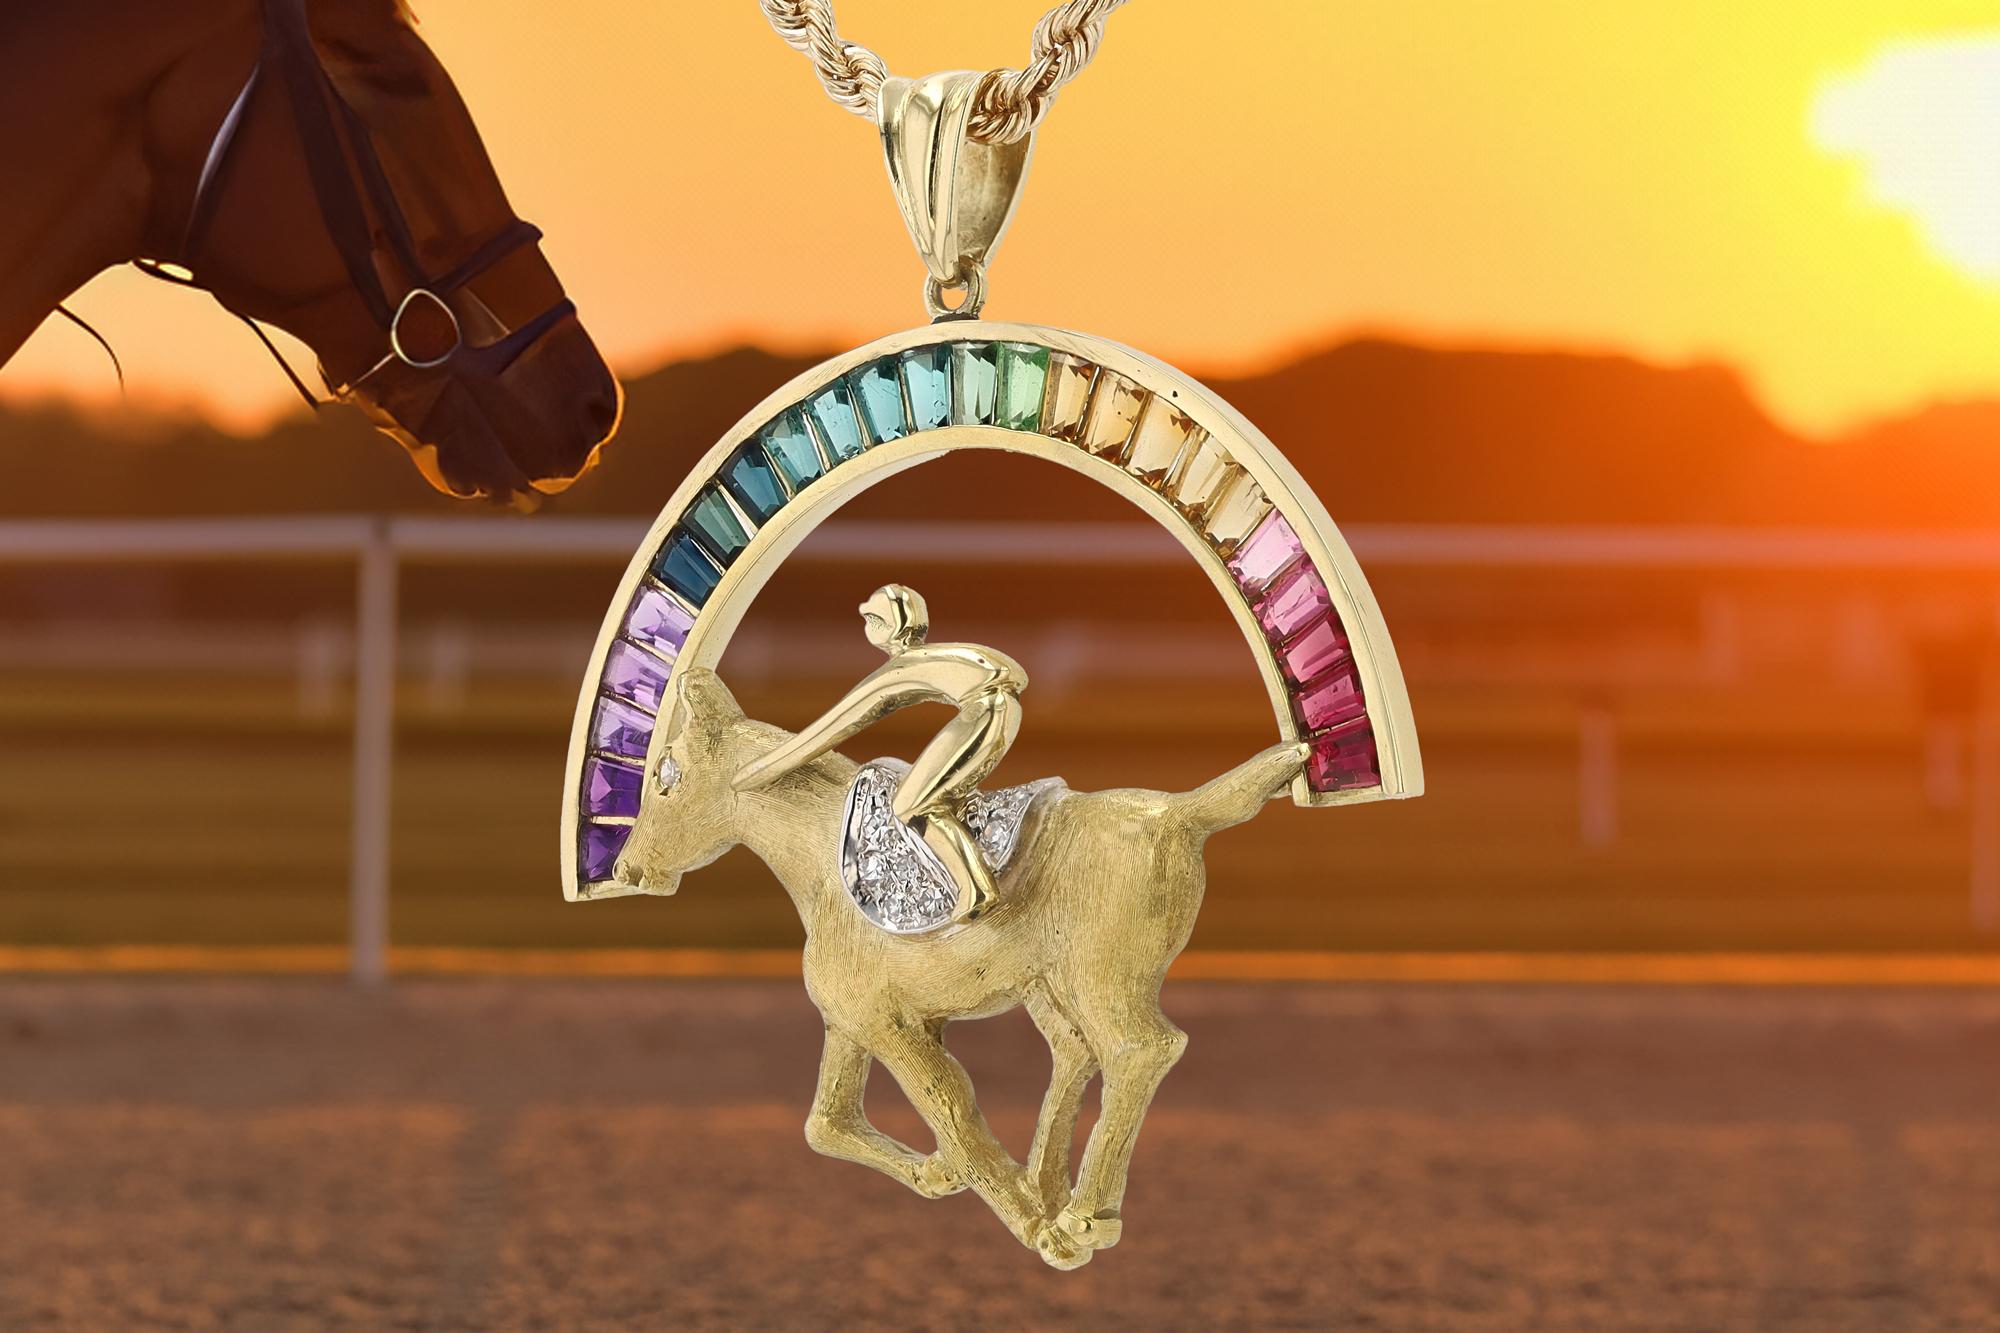 A fabulous thoroughbred horse racing necklace with a story. One of only 3 fillies to win the Kentucky Derby, Winning Colors, with jockey Gary Stevens riding to victory on a pavé diamond saddle below a 4 carat gemstone rainbow of tourmaline, amethyst